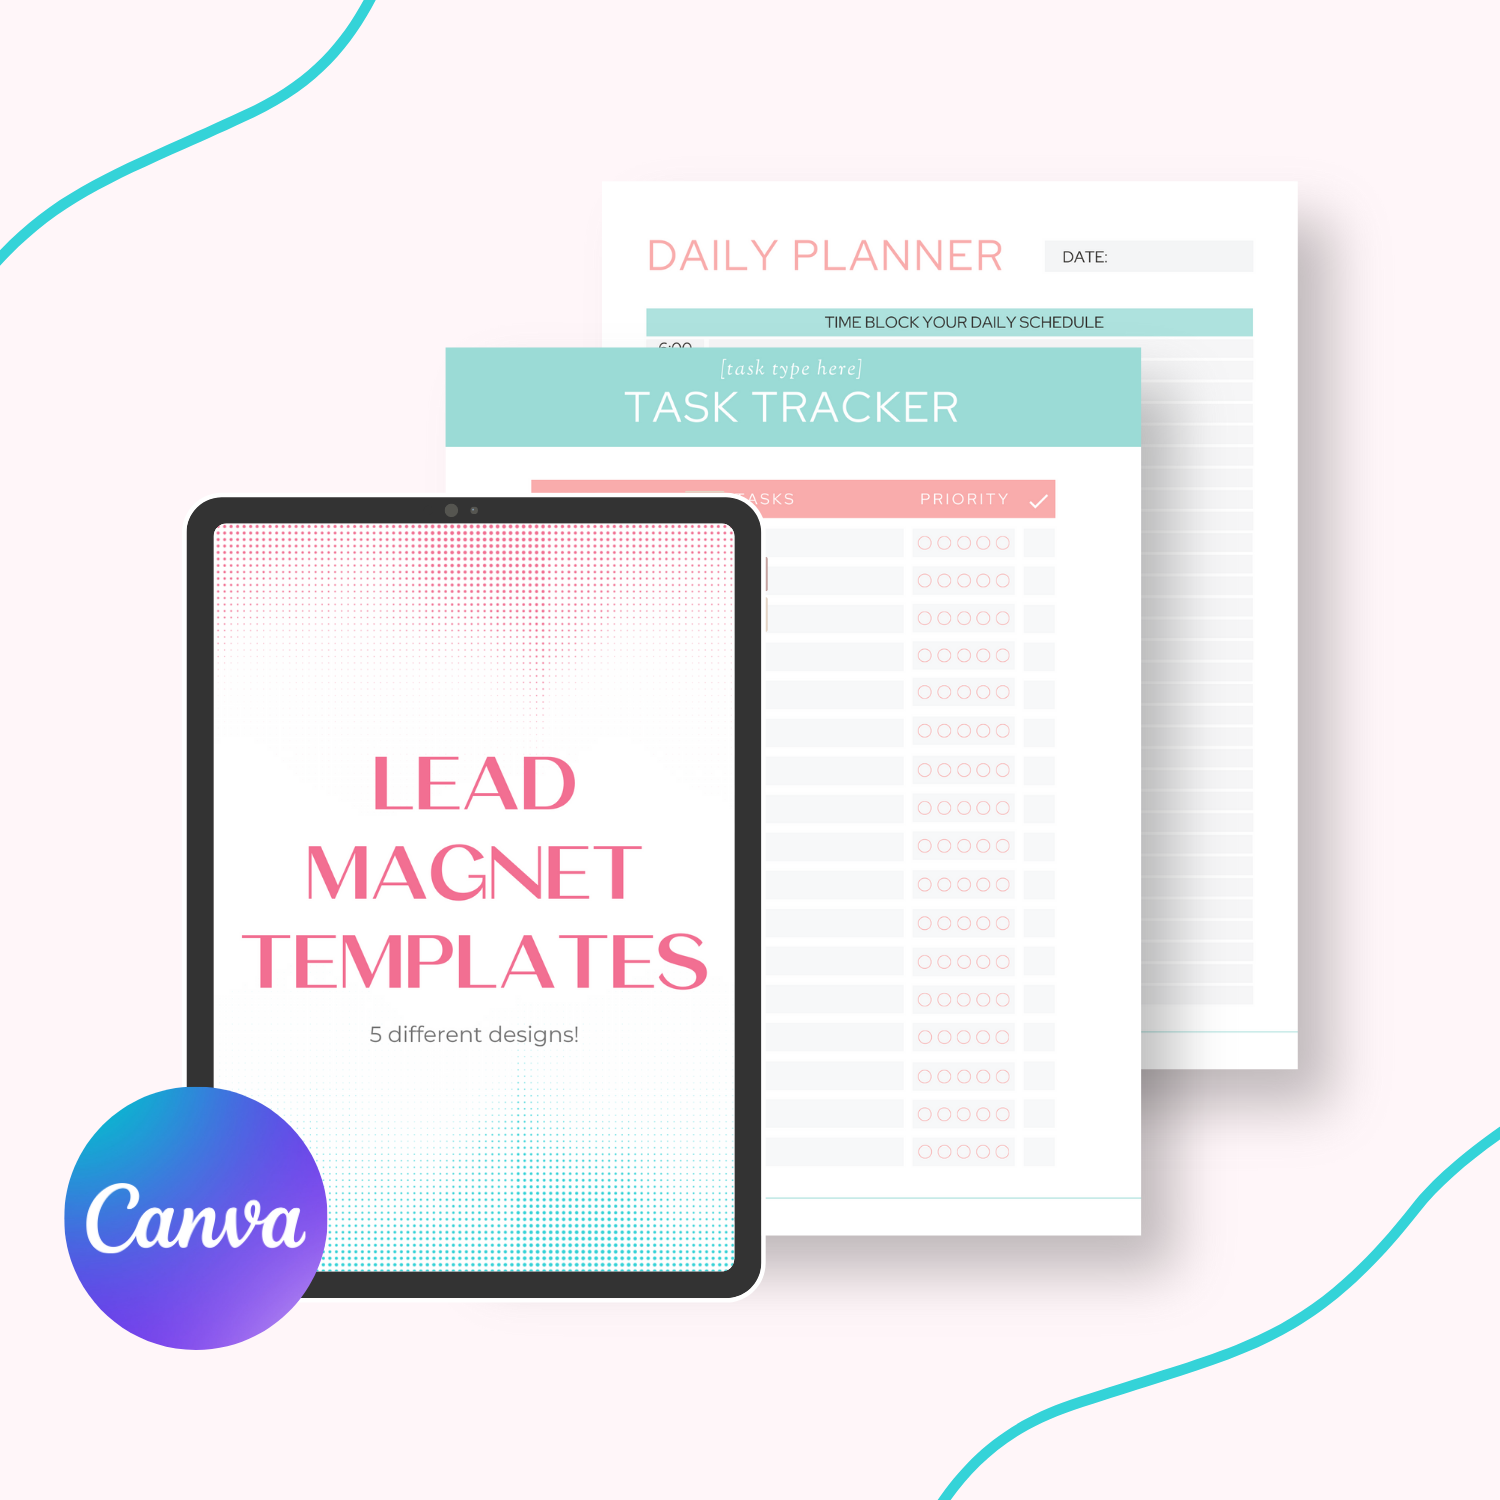 A tablet and graphic mockup displaying the Canva Lead Magnet Templates.